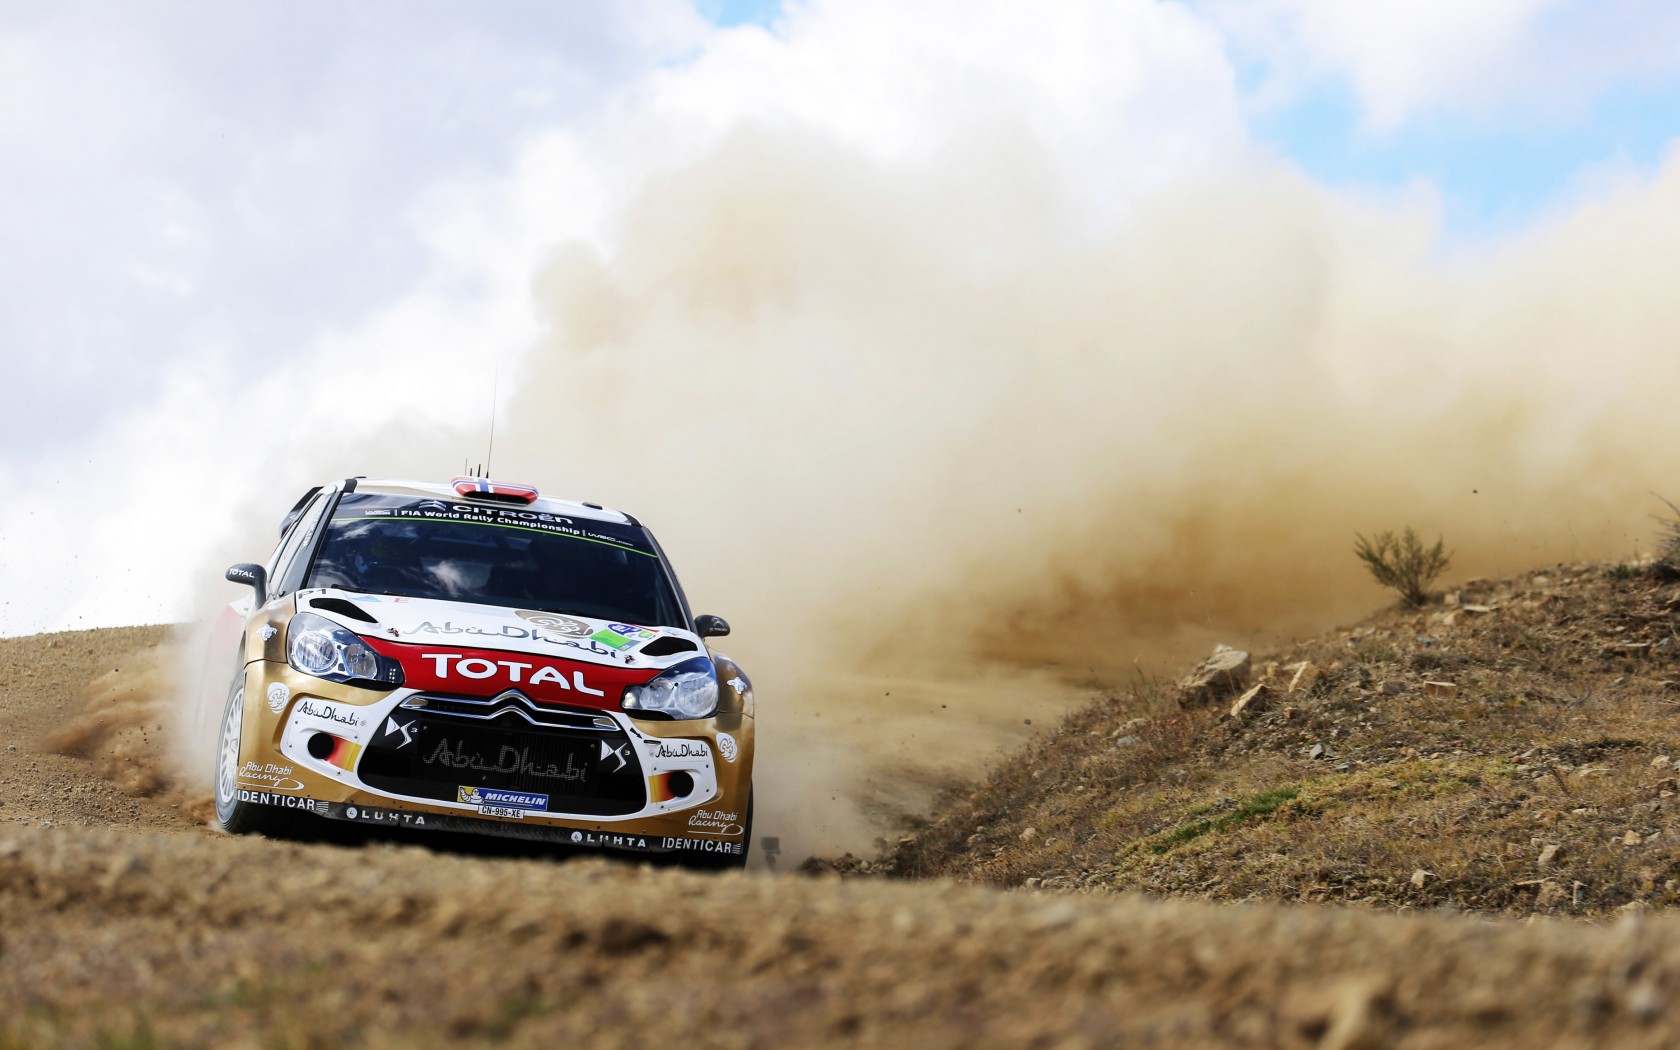 Sports Rallying HD Wallpaper | Background Image